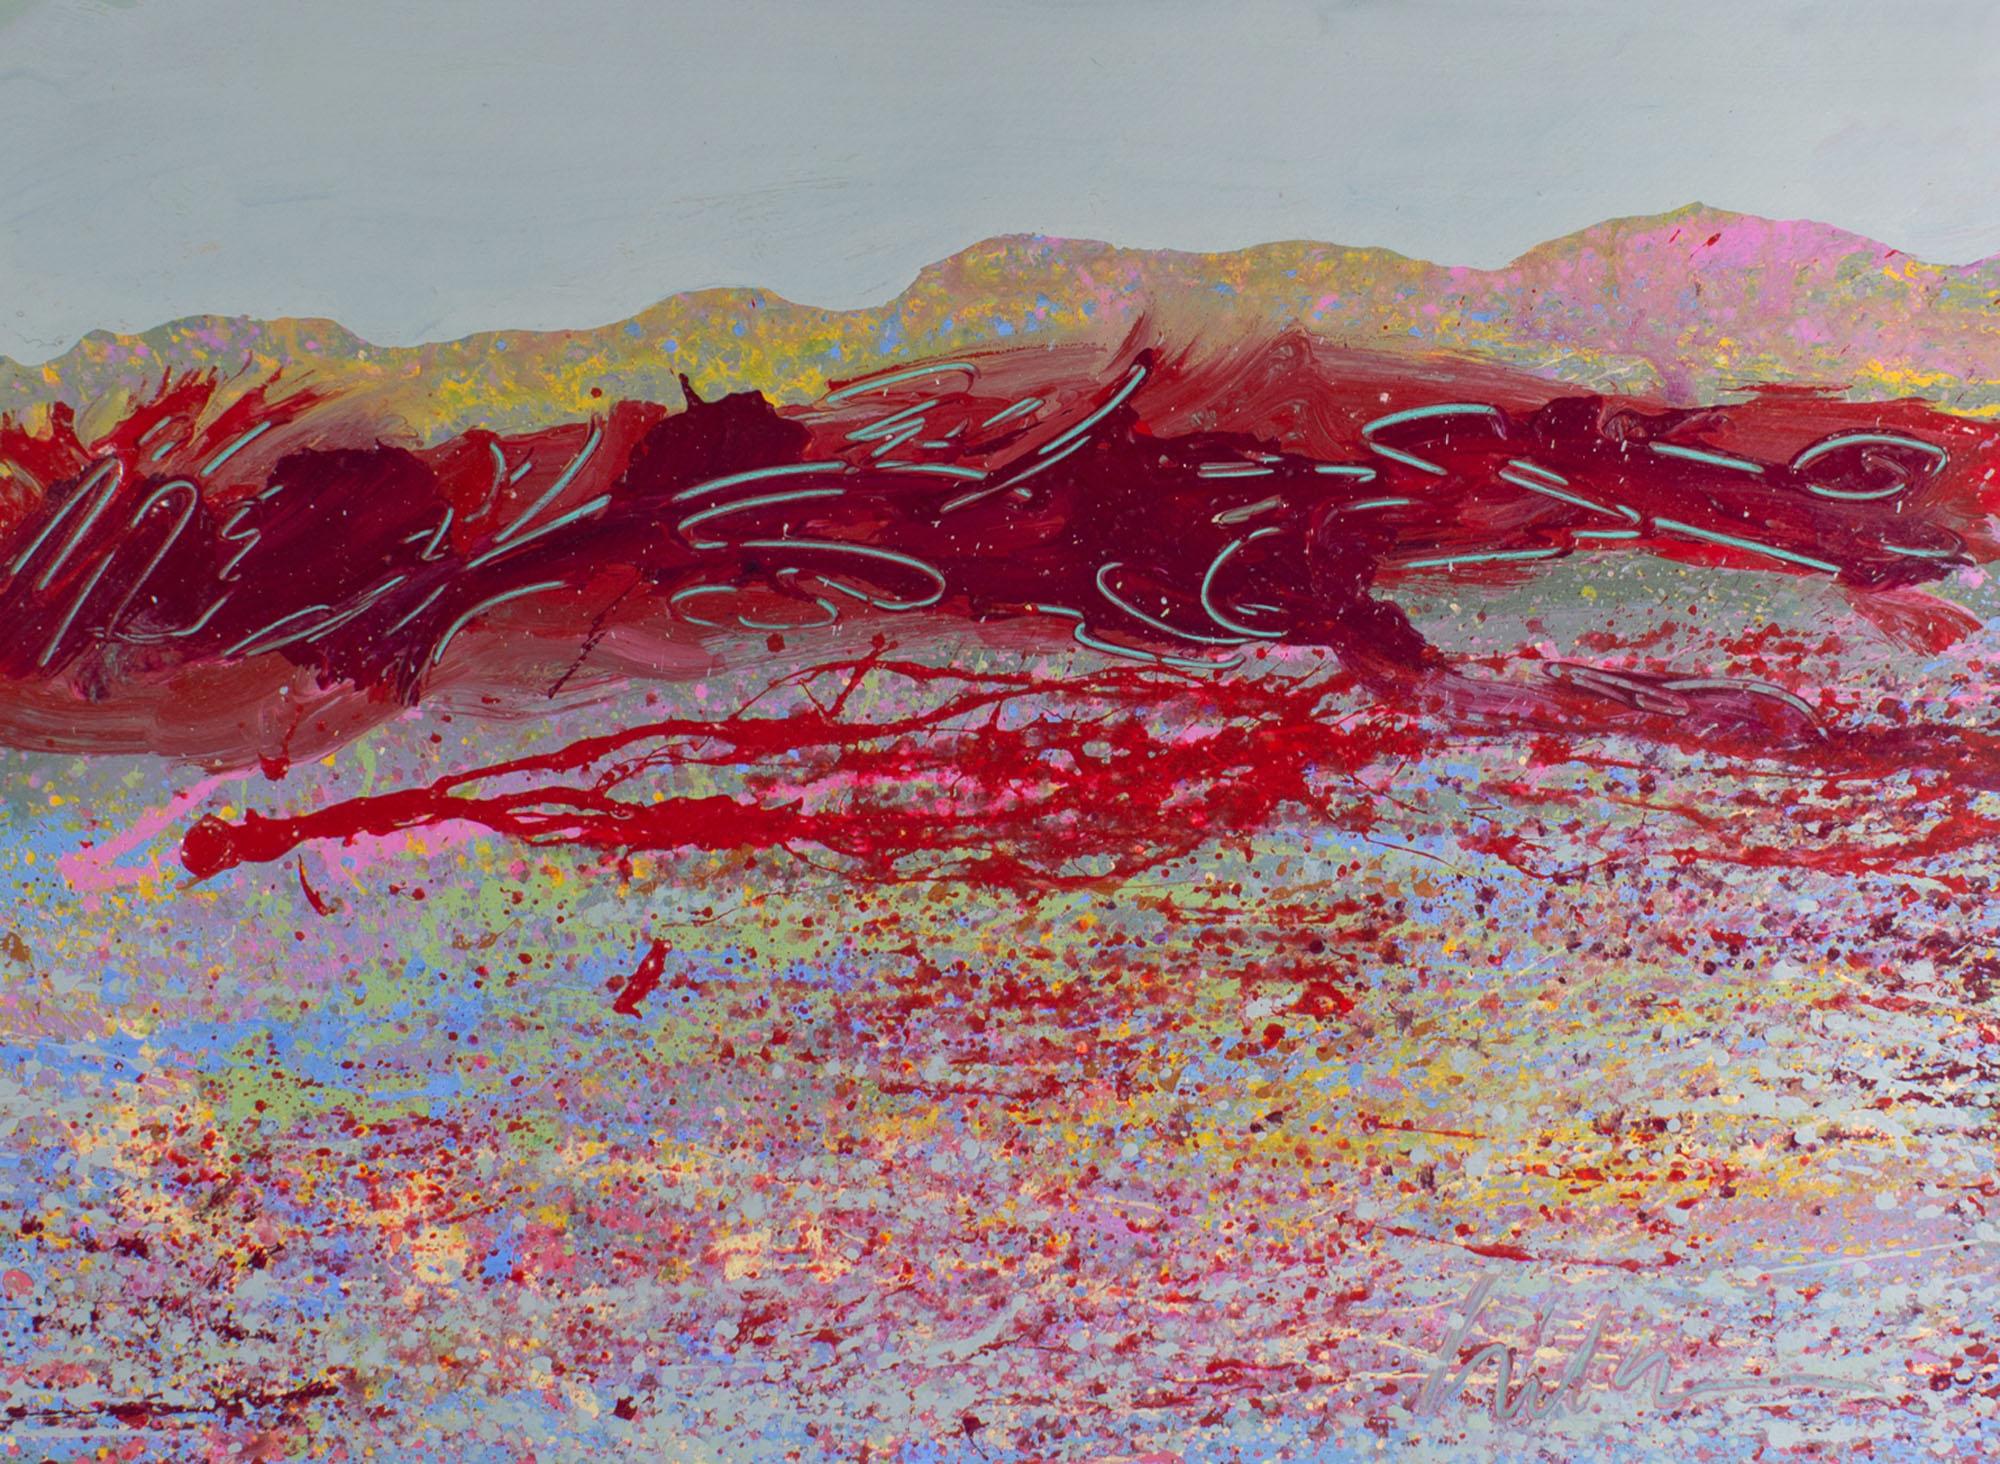 A 1980s abstract acrylic on paper mountainous landscape painting by American artist Harry Hilson (1935-2004). Gestural lines come together to create a vibrant abstract landscape with yellow and pink speckled mountains in the background and red,